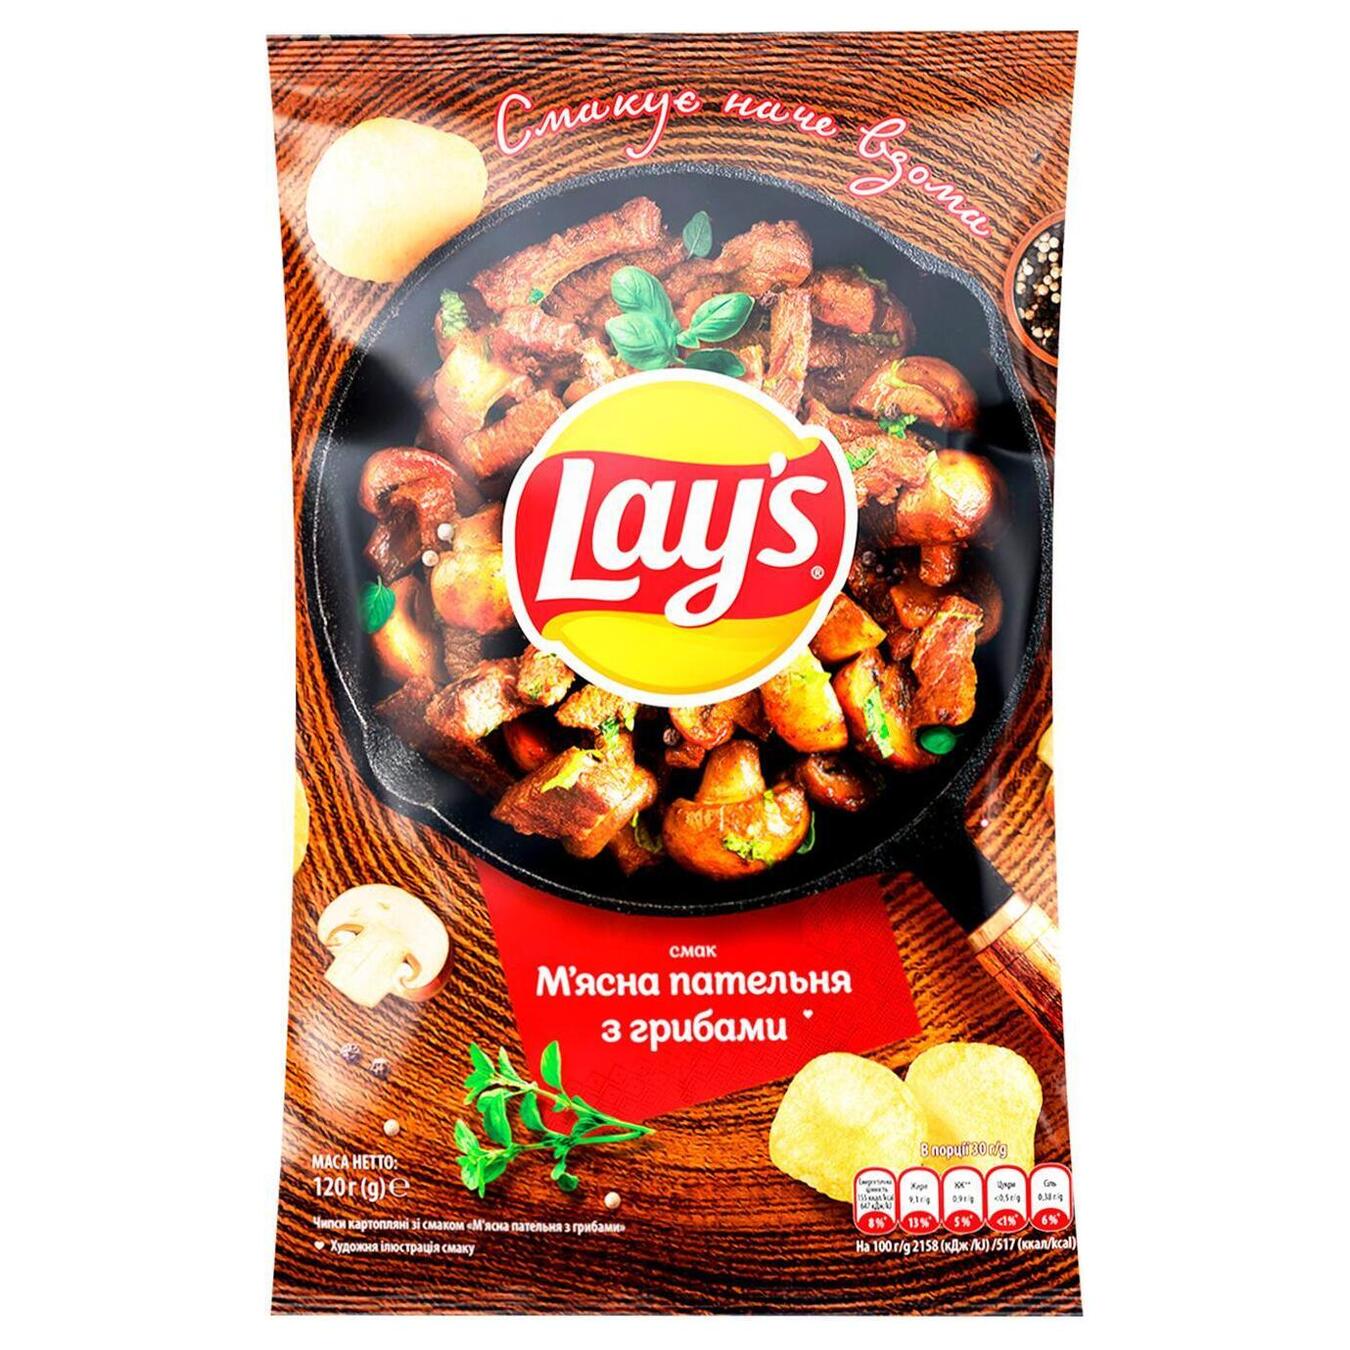 Lay's potato chips, meat pan flavor with mushrooms, soft packaging 120g